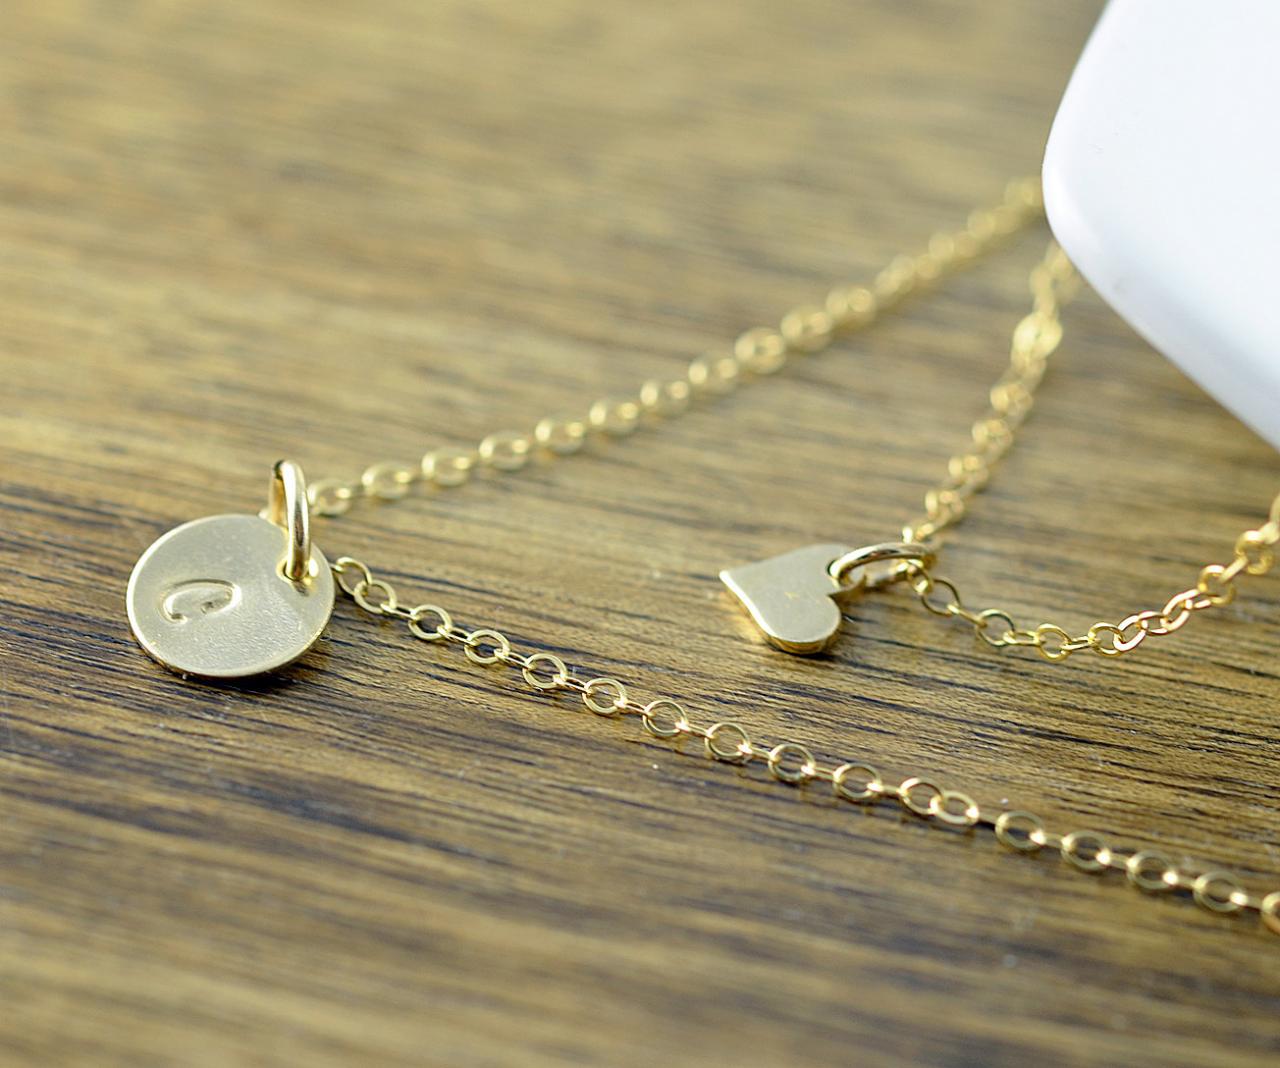 Layered Necklace - Delicate Gold Necklace - Simple Necklace - Initial Necklace - Everyday Necklace - Bridesmaid Gift - Friend Gift